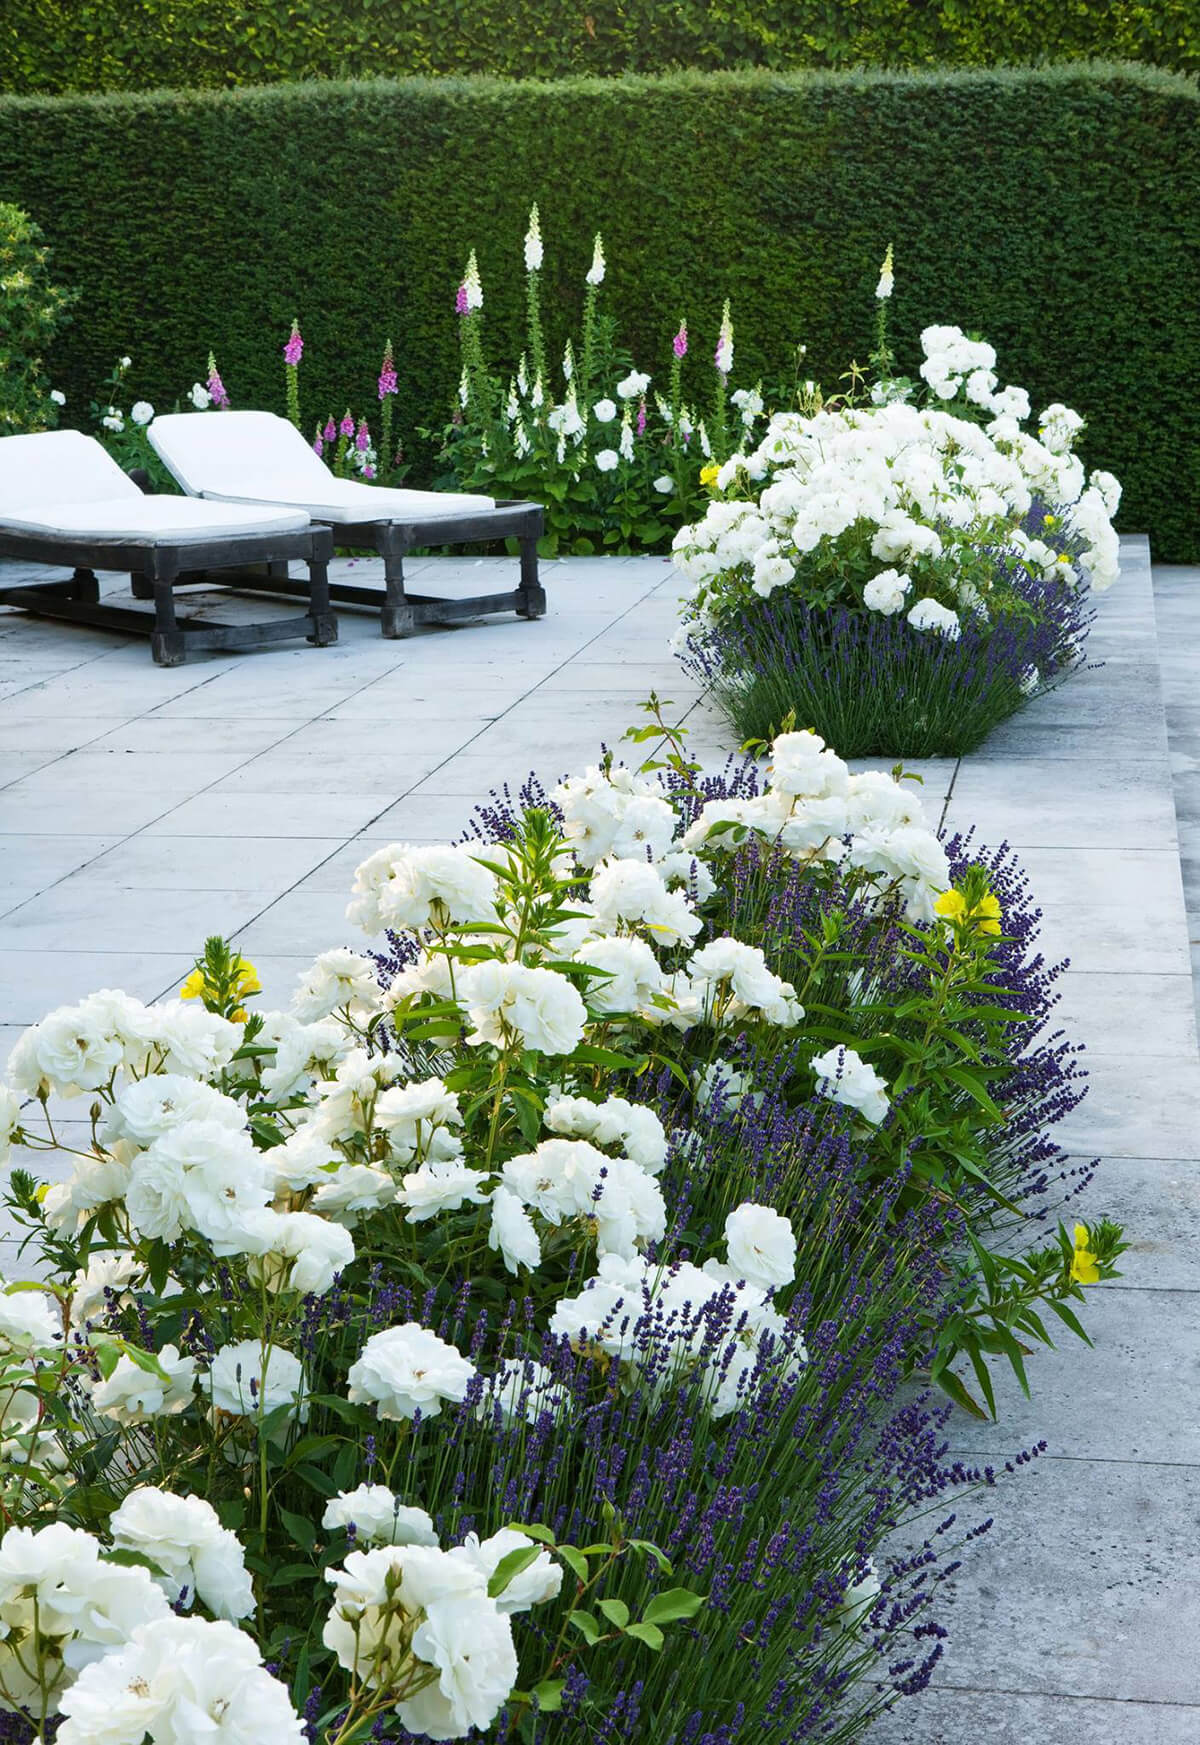 Flower Bed Ideas: Tile Deck with Built-In Flower Beds